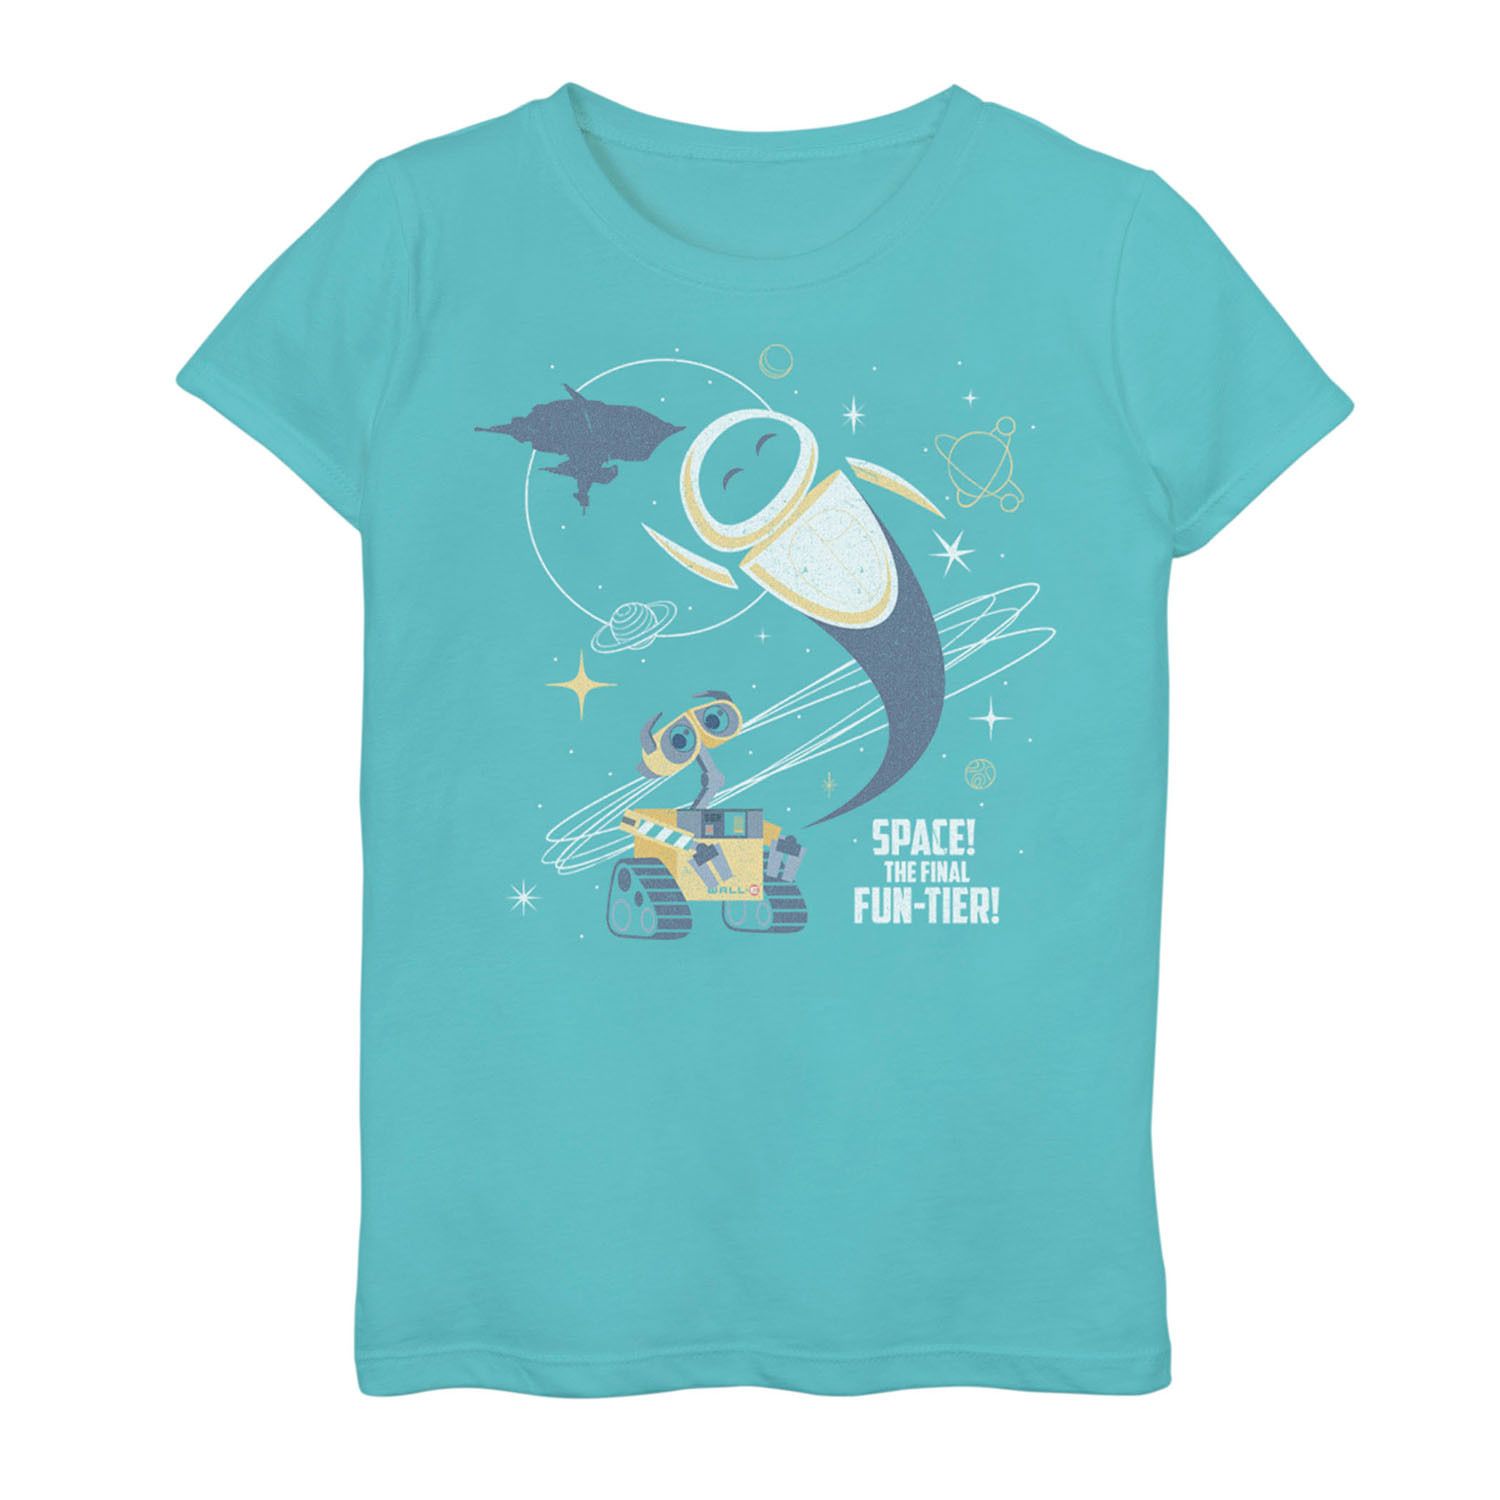 Image for Disney / Pixar Girls 7-16 Wall-E Retro Space Funtier Graphic Tee at Kohl's.